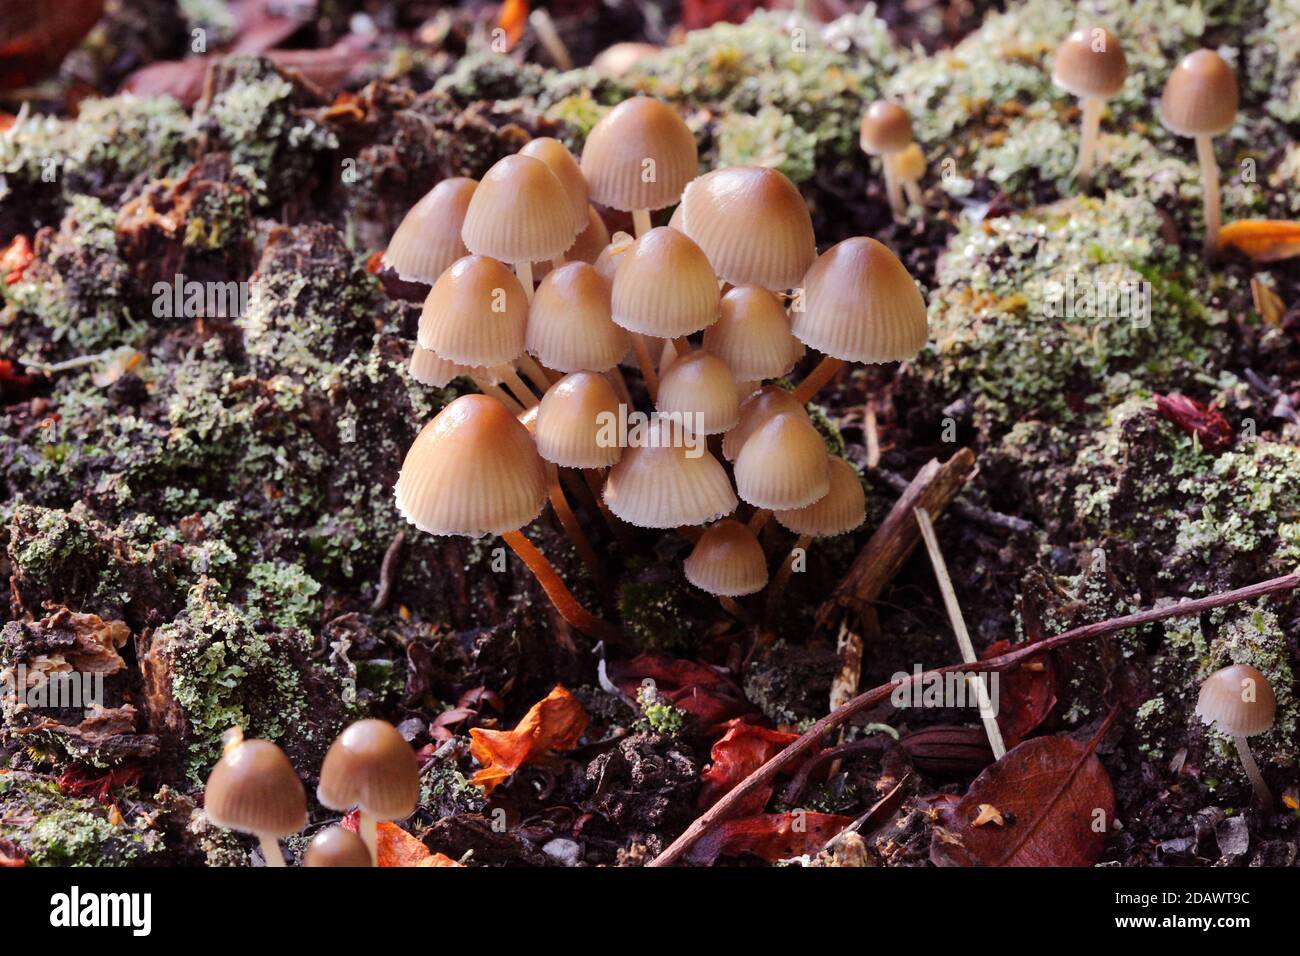 Mycena inclinata, Clustered Bonnet mushrooms or toadstools cluster fungus or fungi growing in the UK Stock Photo